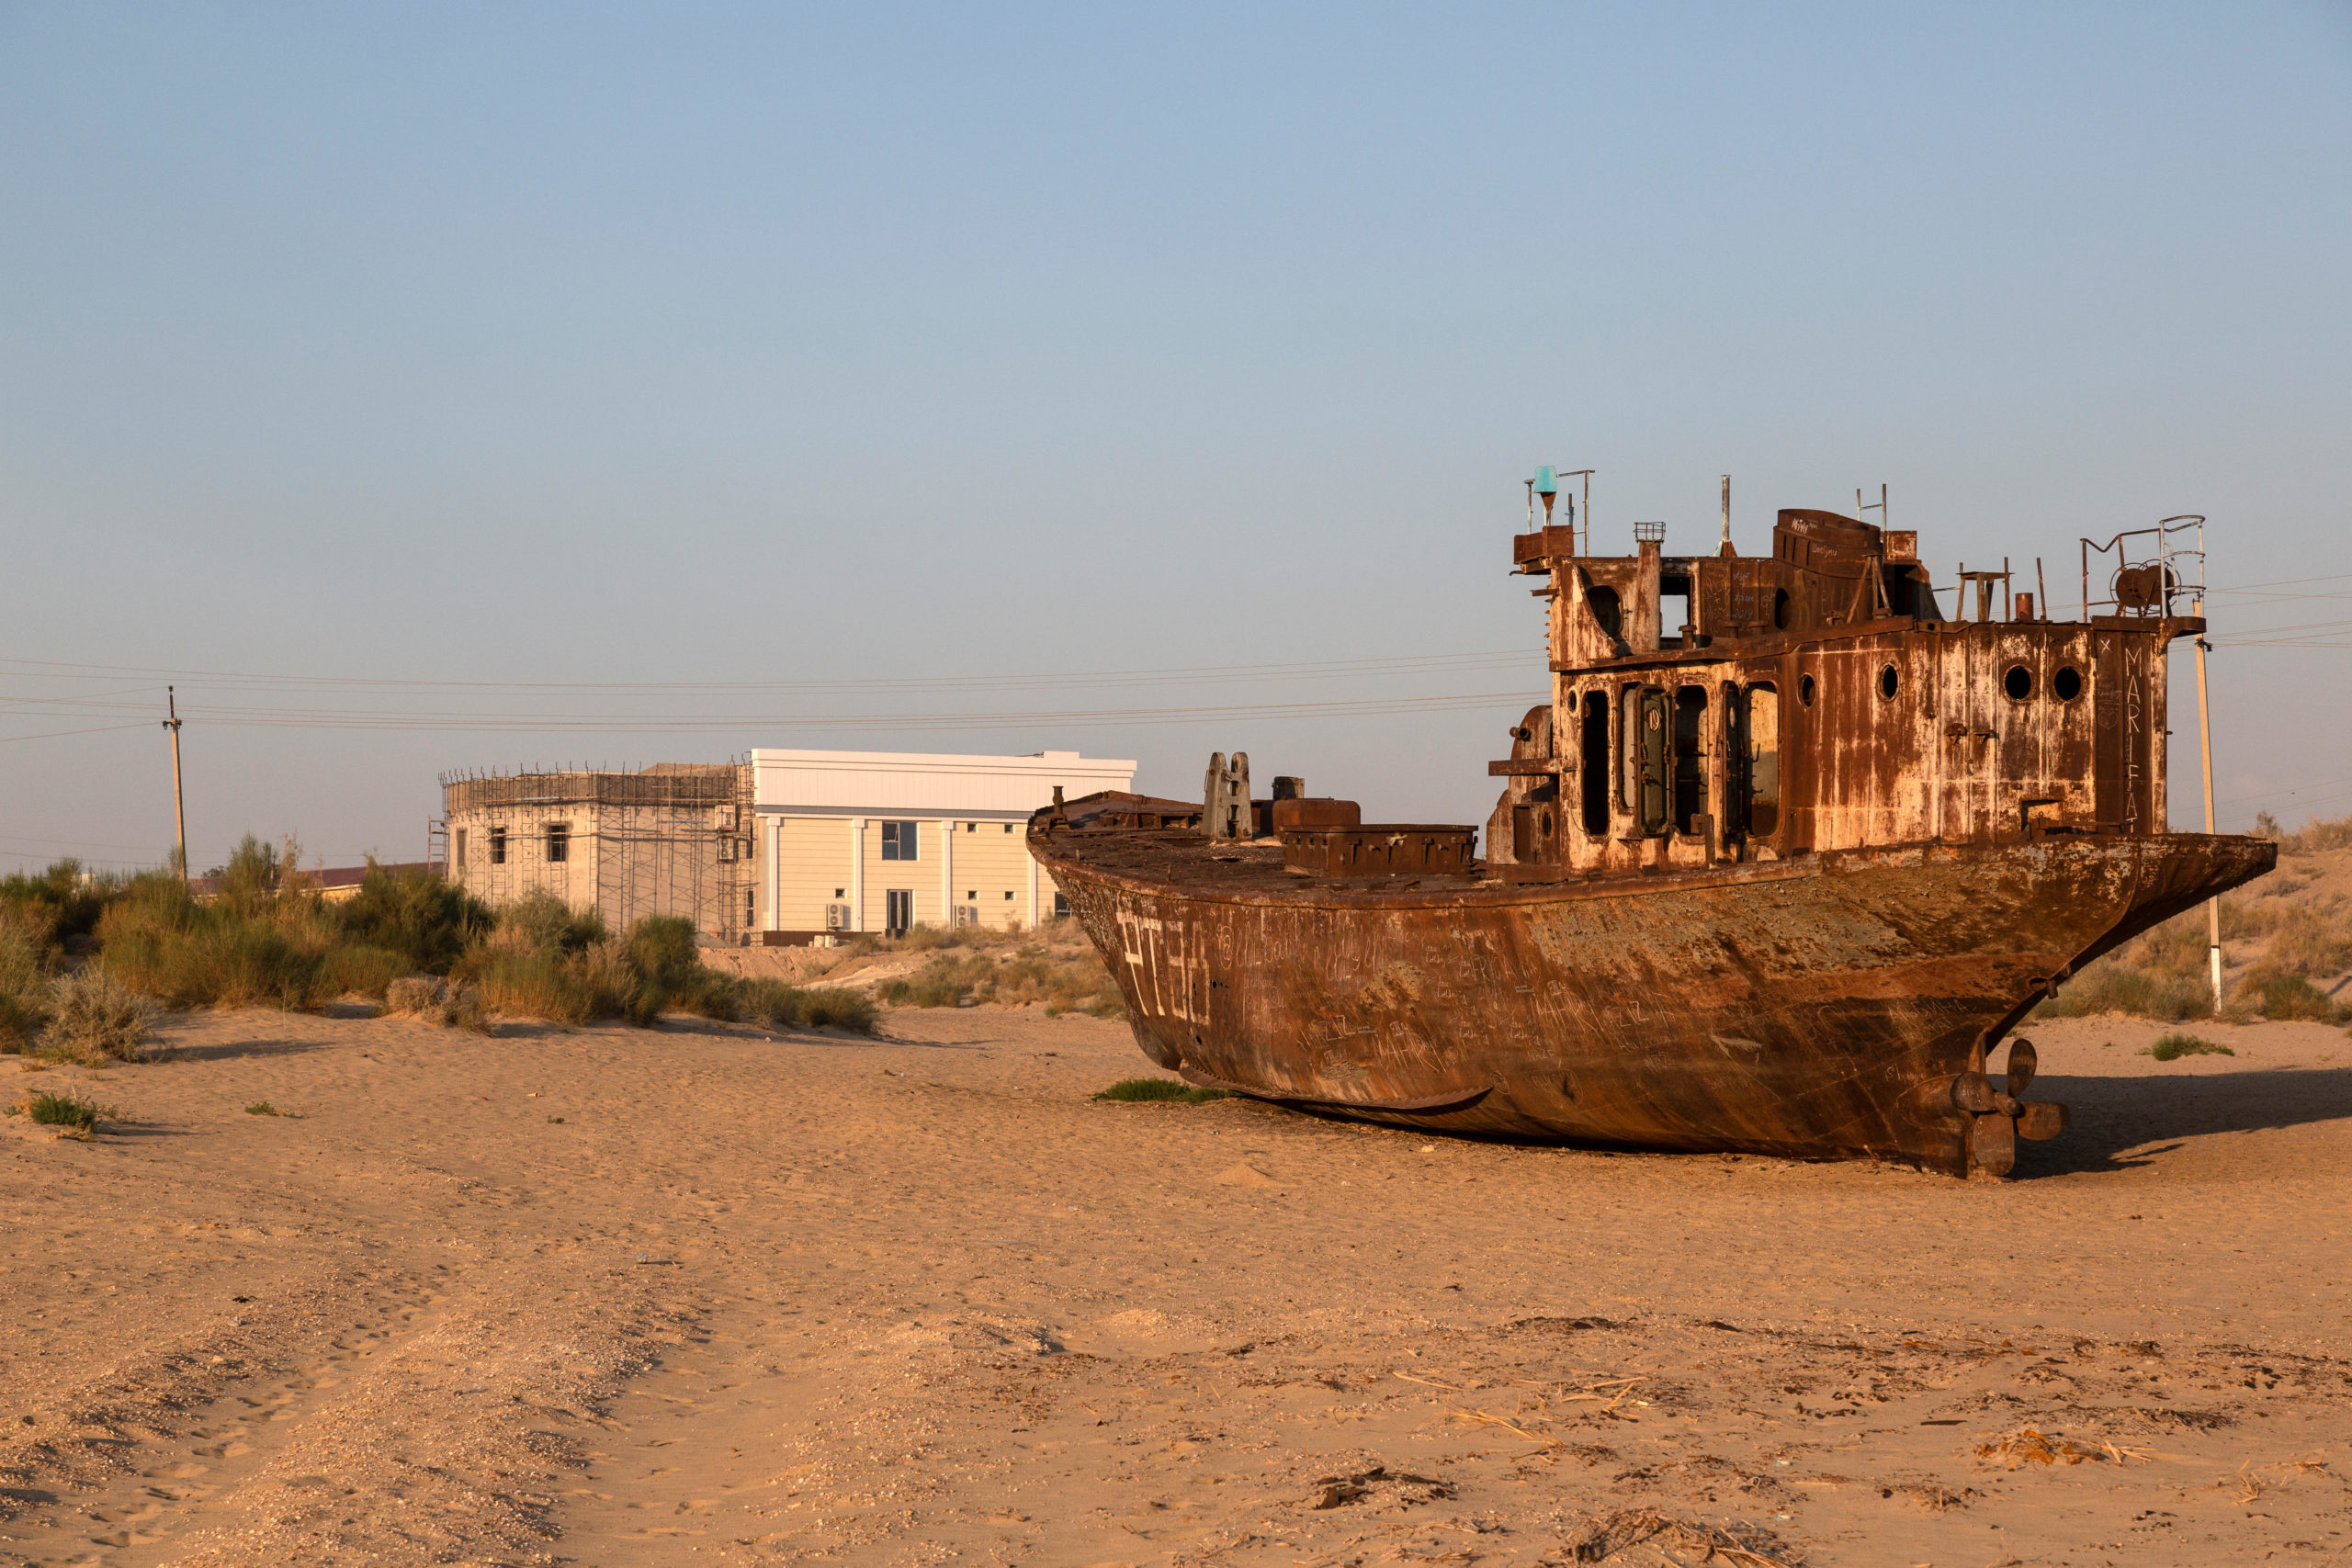 Rusting boats in the desert 